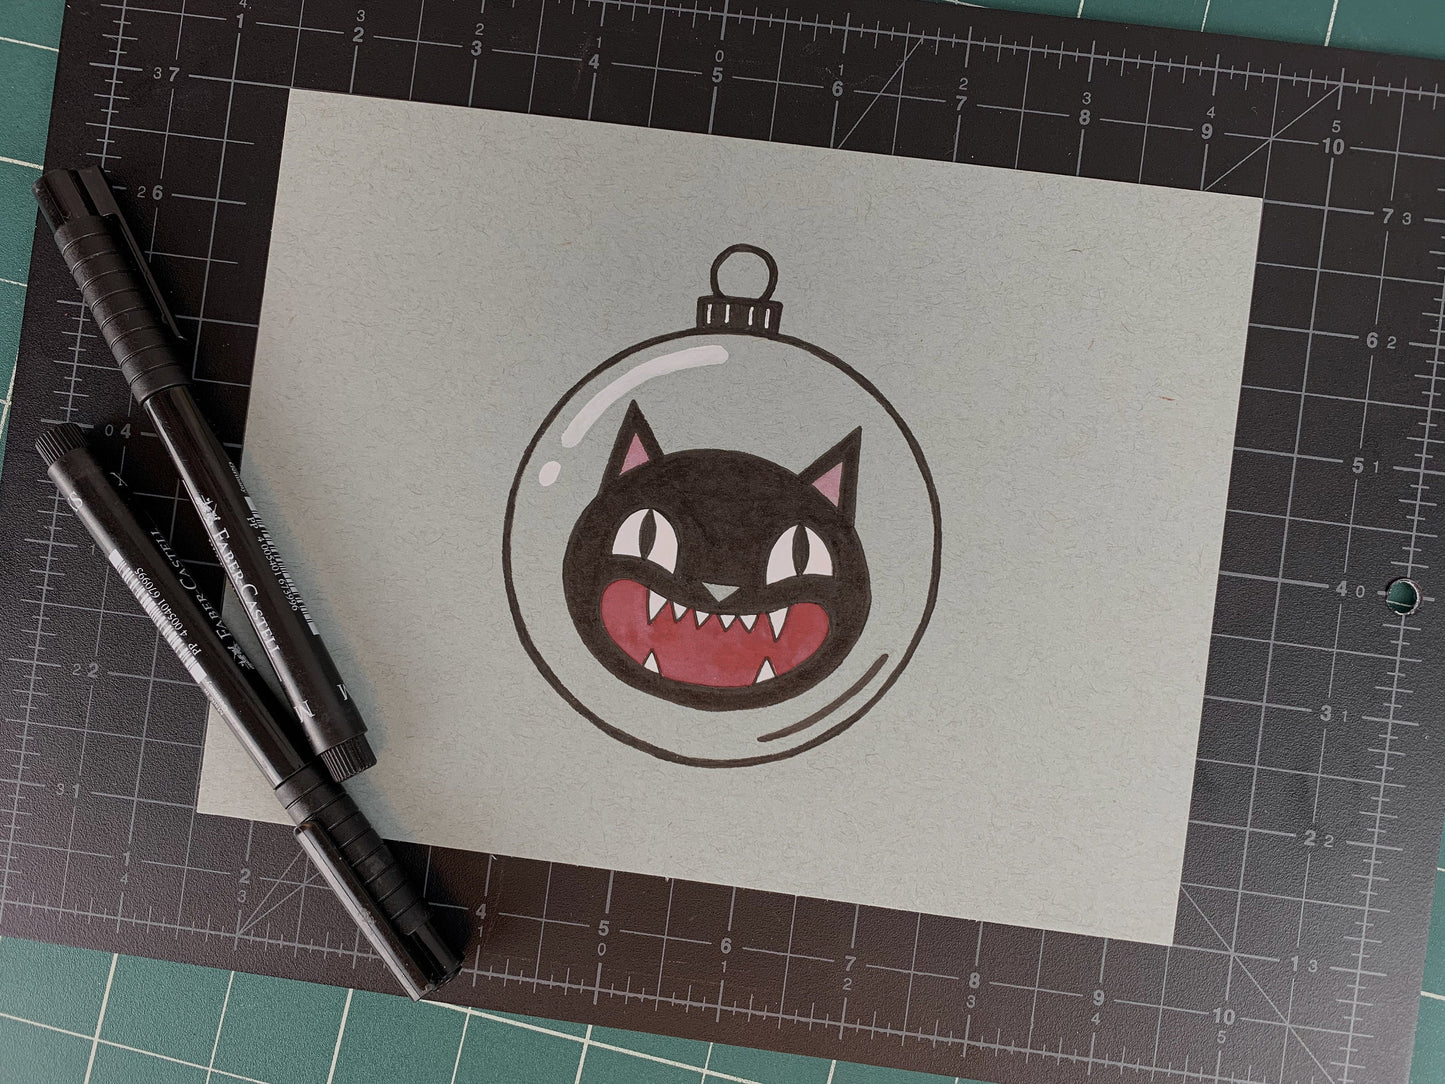 Studio shot of an original illustration of a vintage looking screaming cat inside of a glass ornament, like a Halloween decoration. Made using ink, watercolor, and gouache.